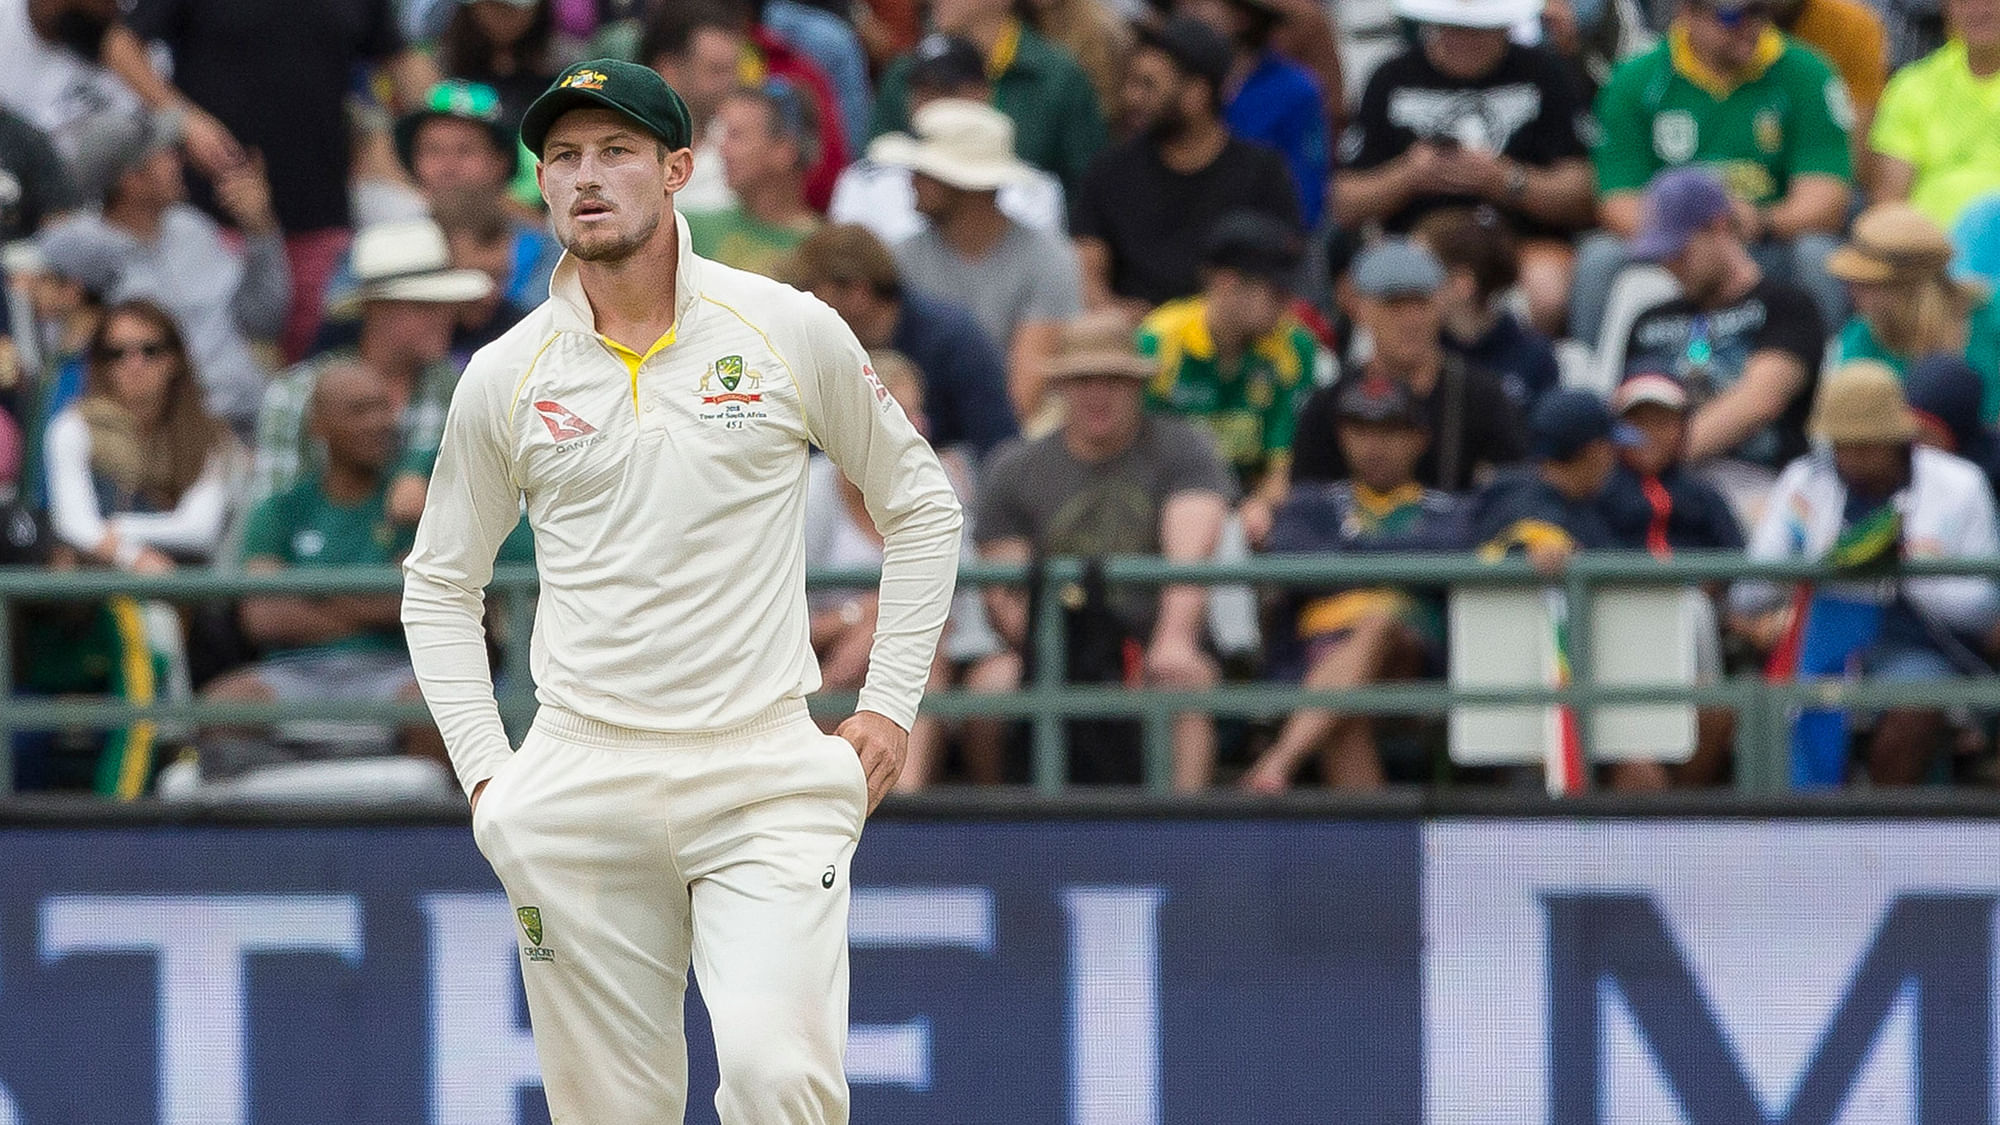 Australian batsman Cameron Bancroft was caught on camera rubbing a yellow object against the ball during the third Test against South Africa.